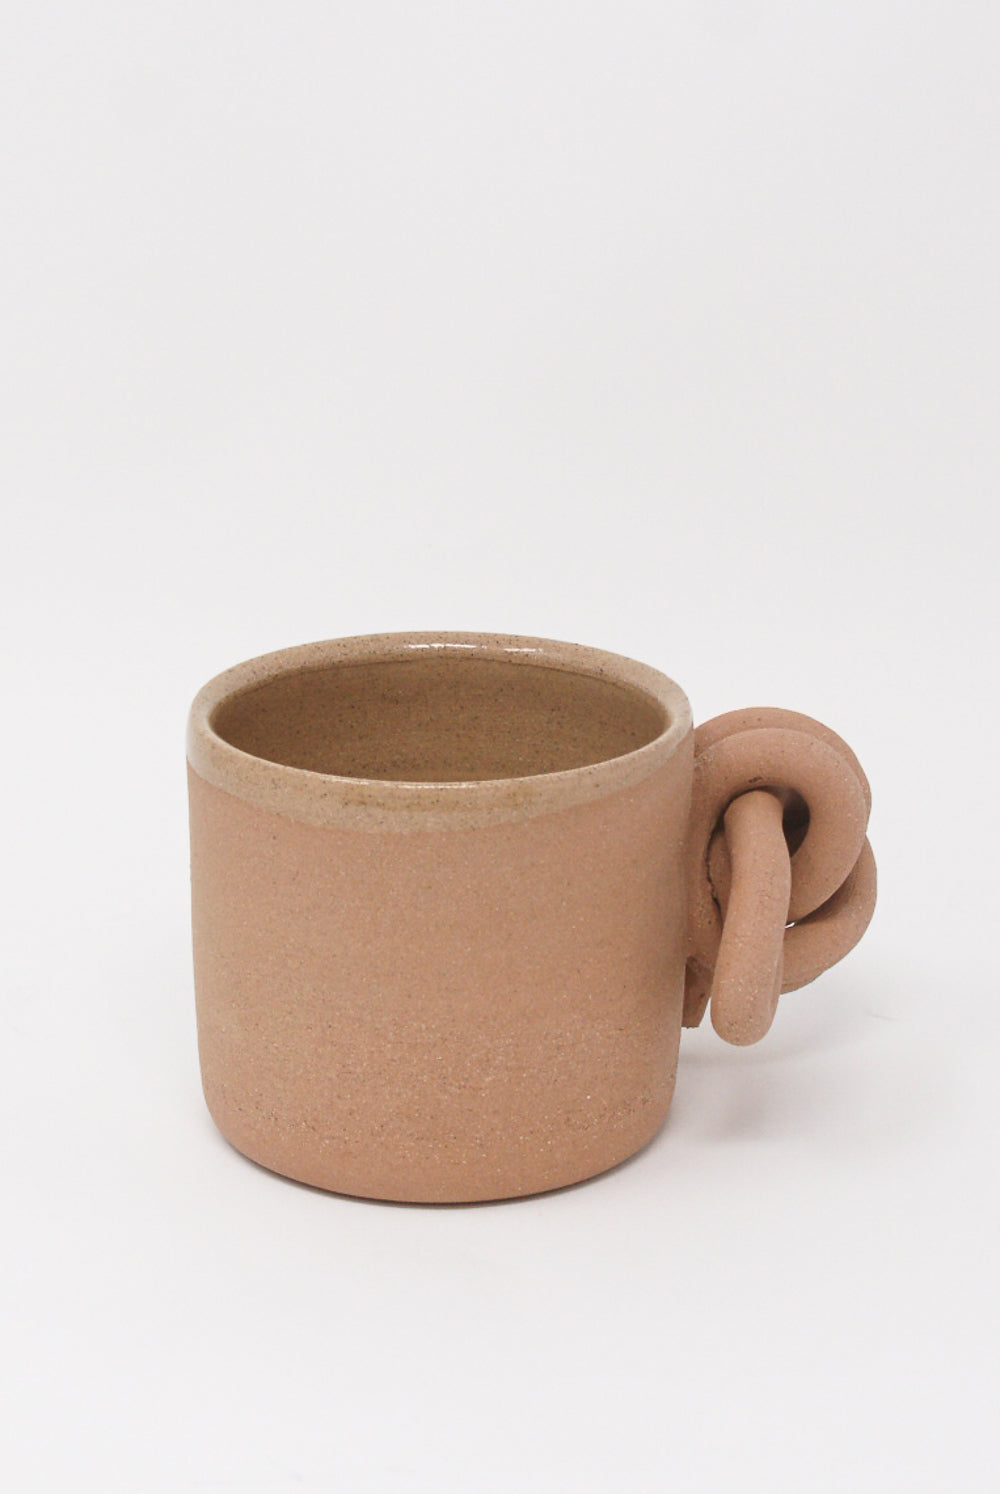 Lost Quarry - Overhand Knot Mug in Terracotta side view